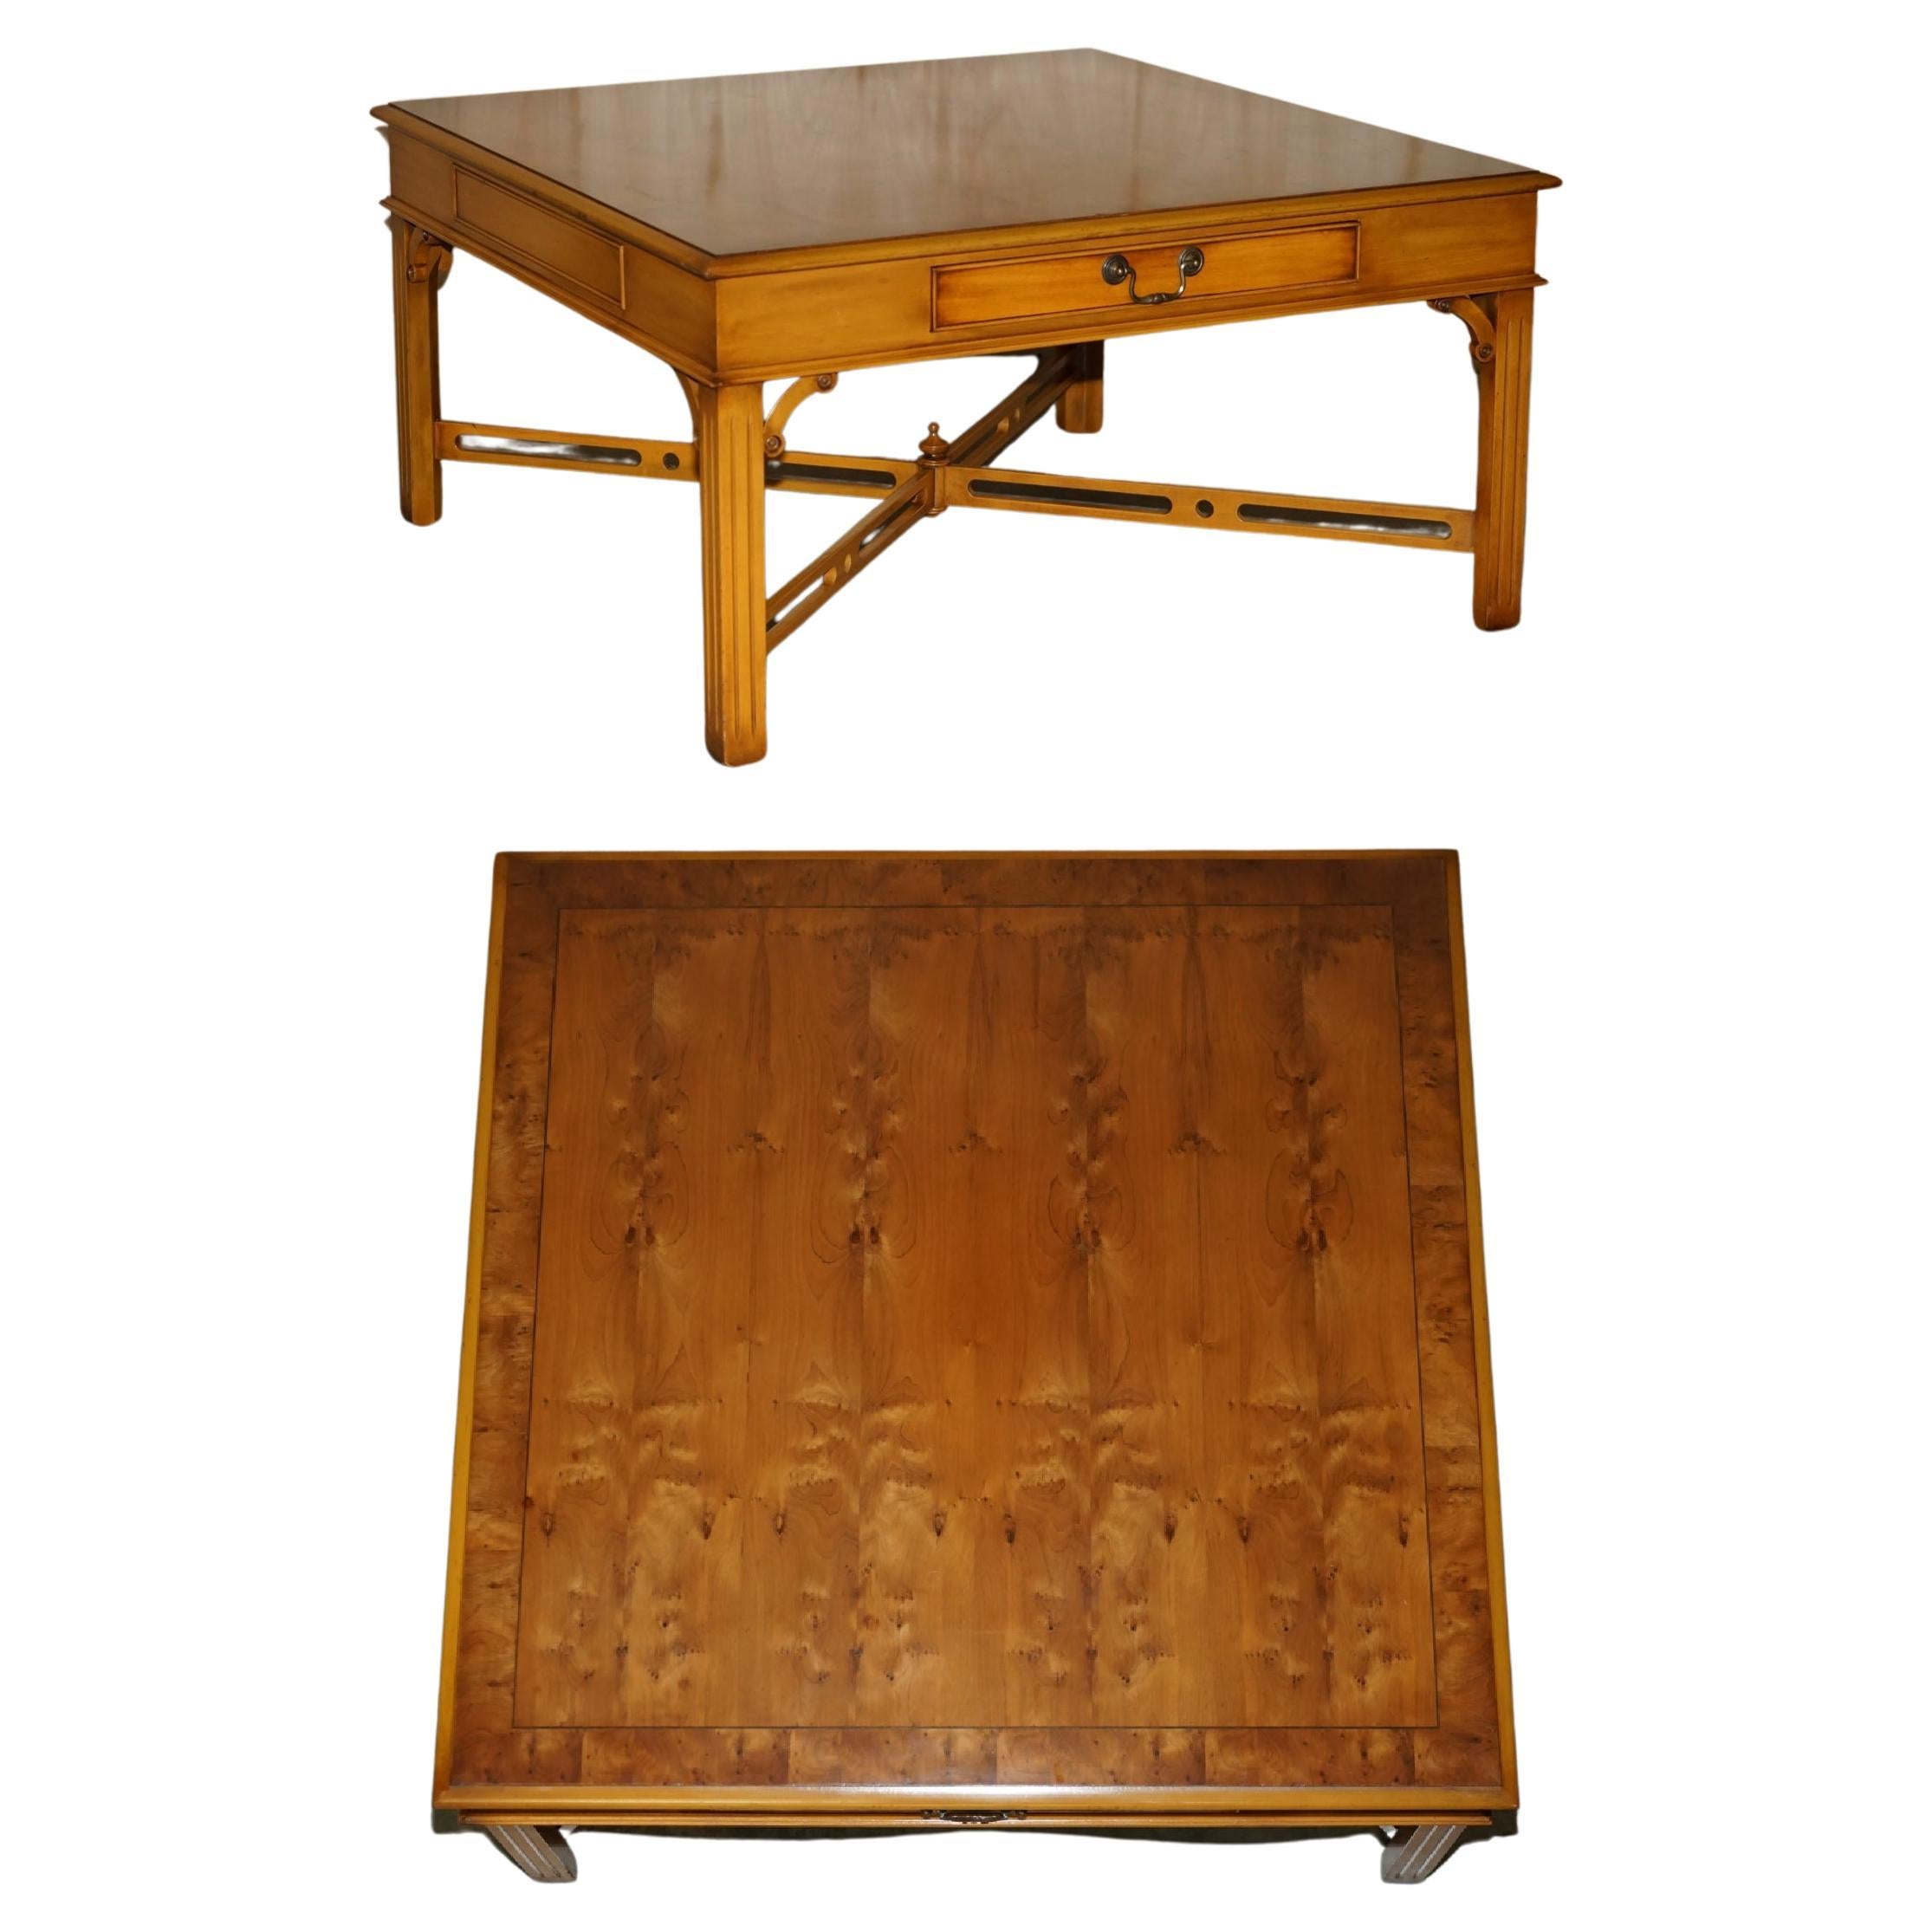 LOVELY BURR YEW WOOD TWO DRAWER COFFEE TABLE WiTH THOMAS CHIPPENDALE STRETCHES im Angebot